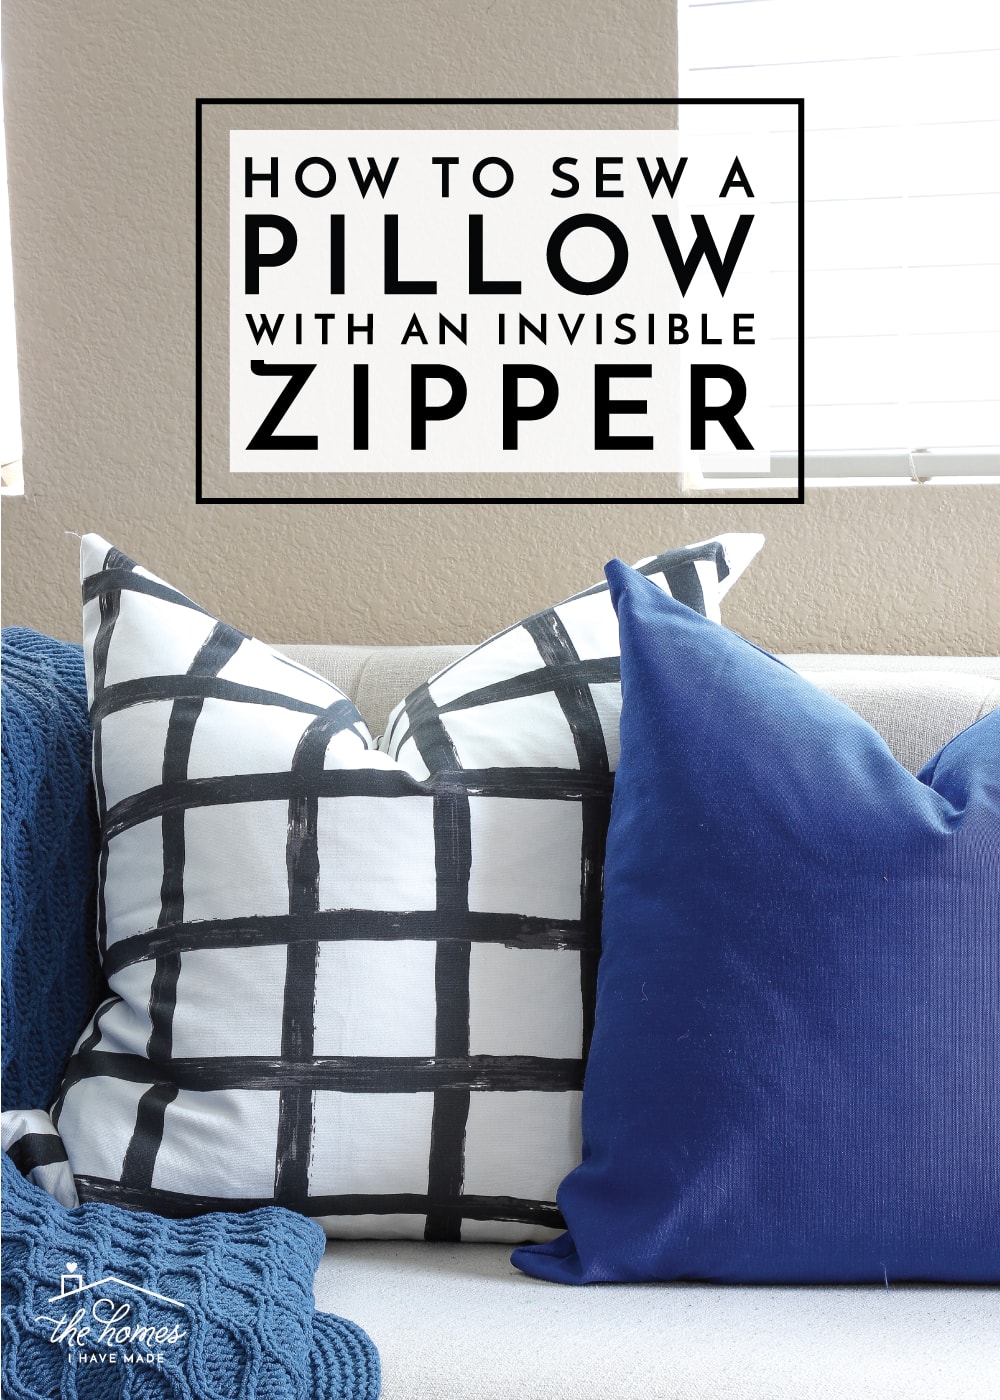 How to Sew a Pillow with an Invisible Zipper